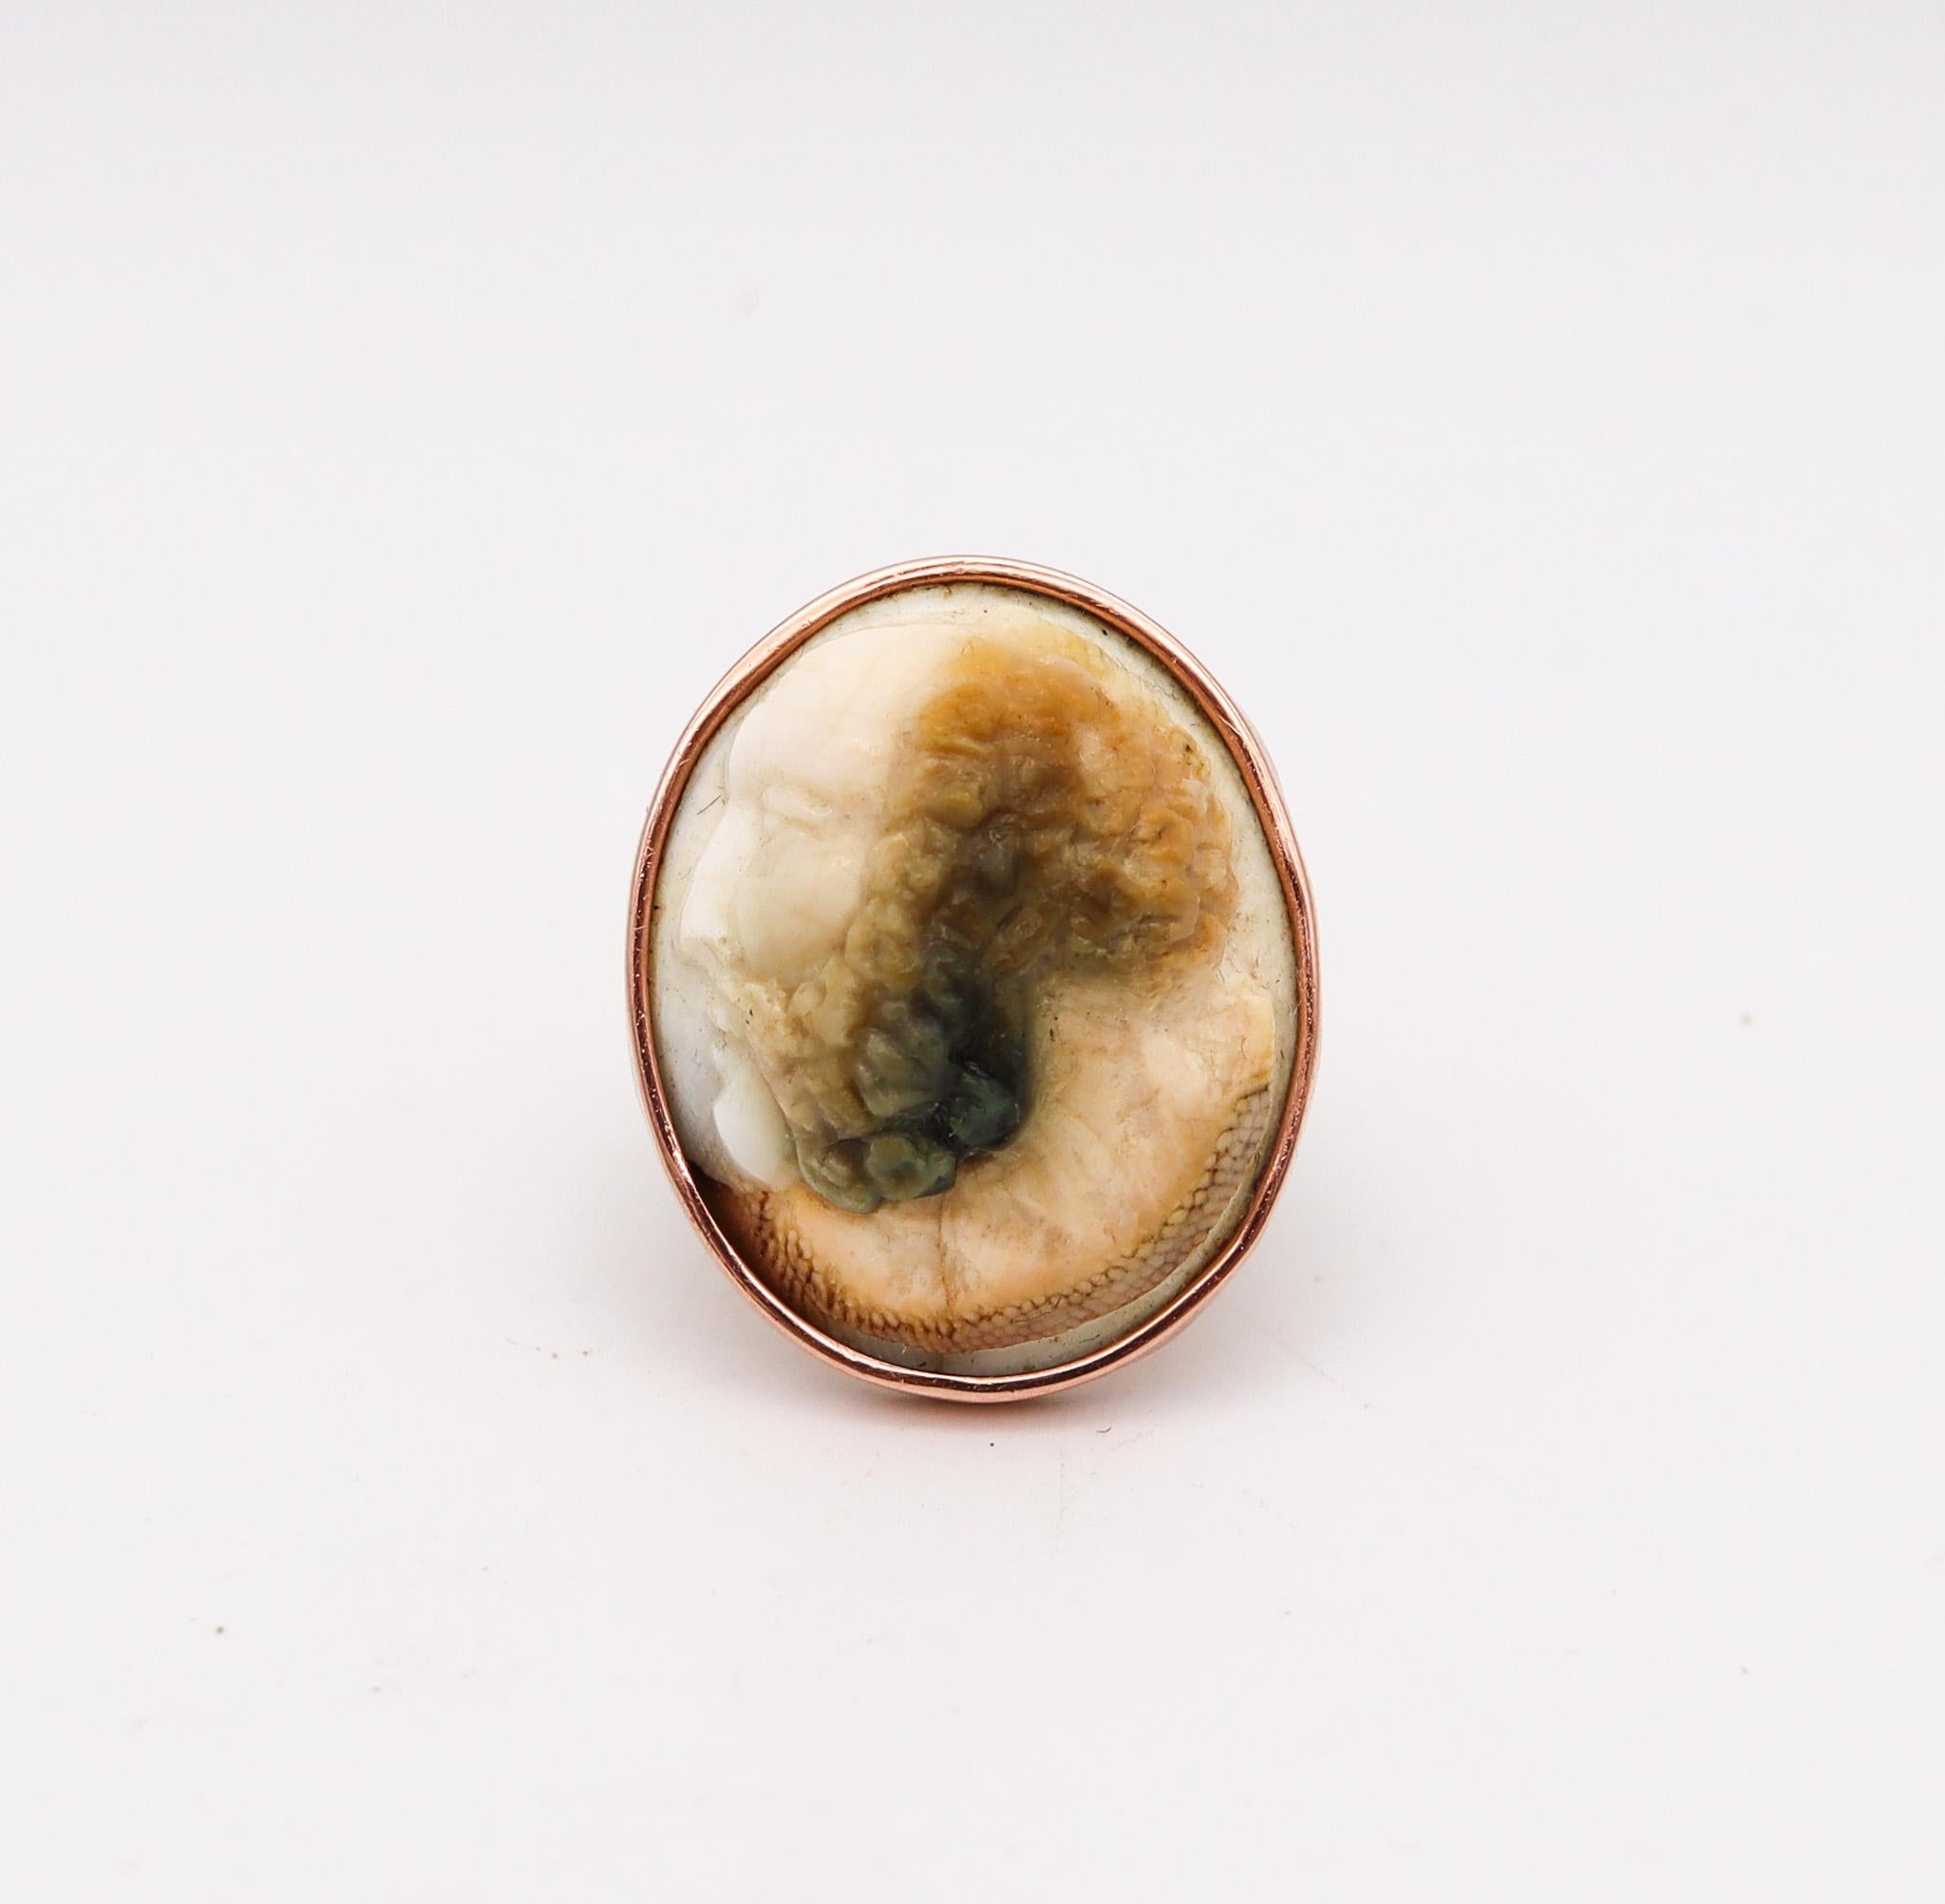 Victorian ring with carved operculum shell

An extremely rare piece, created in England during the high Victorian era (1837-1901), back in the 1870. This is a very unusual memento carved cameo ring, carefully crafted with an oval shape in solid